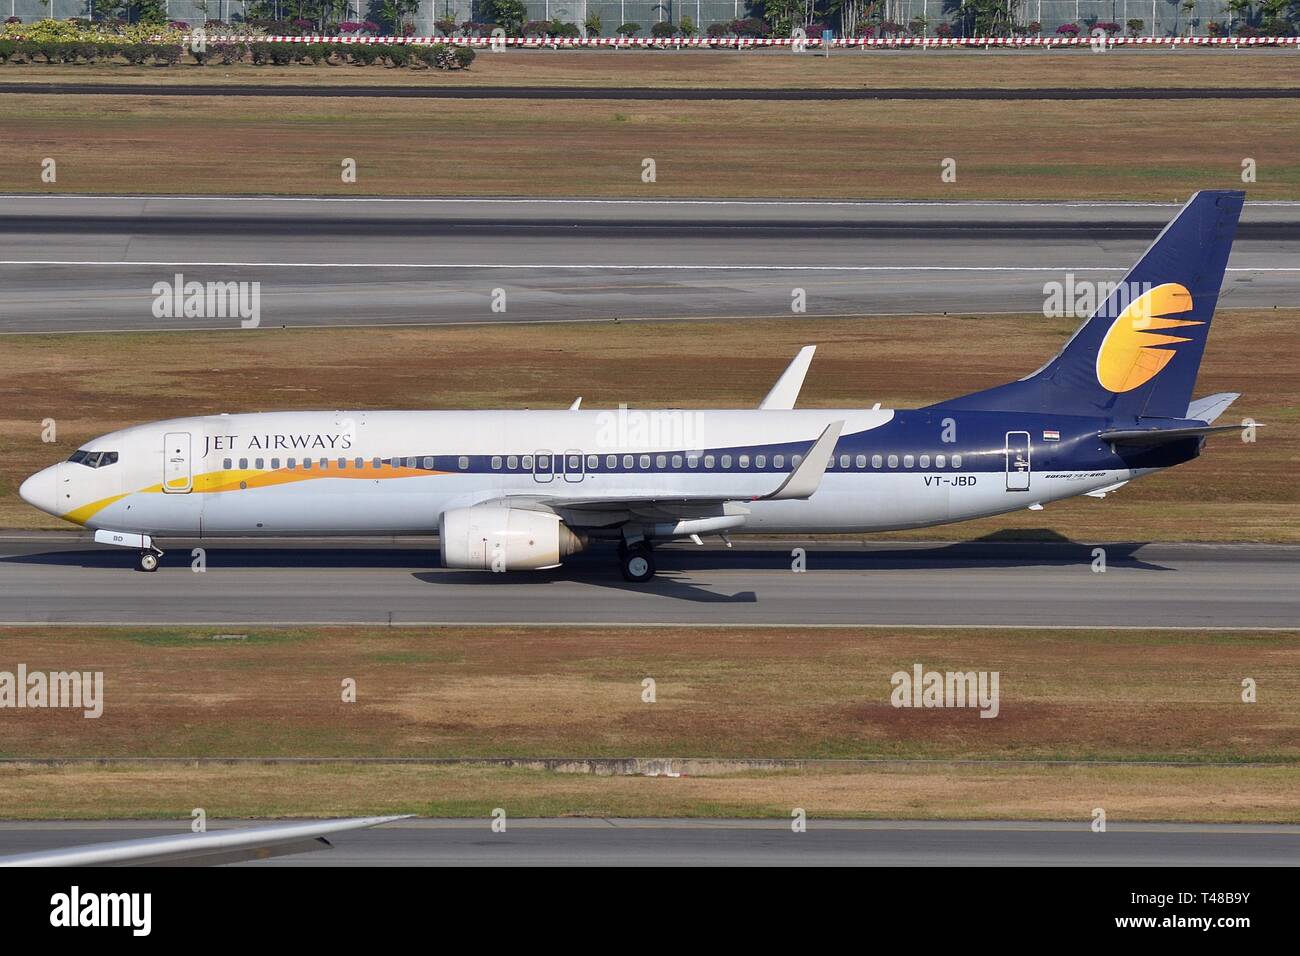 BOEING 737-800(W) AIRCRAFT OF INDIA'S JET AIRWAYS Stock Photo